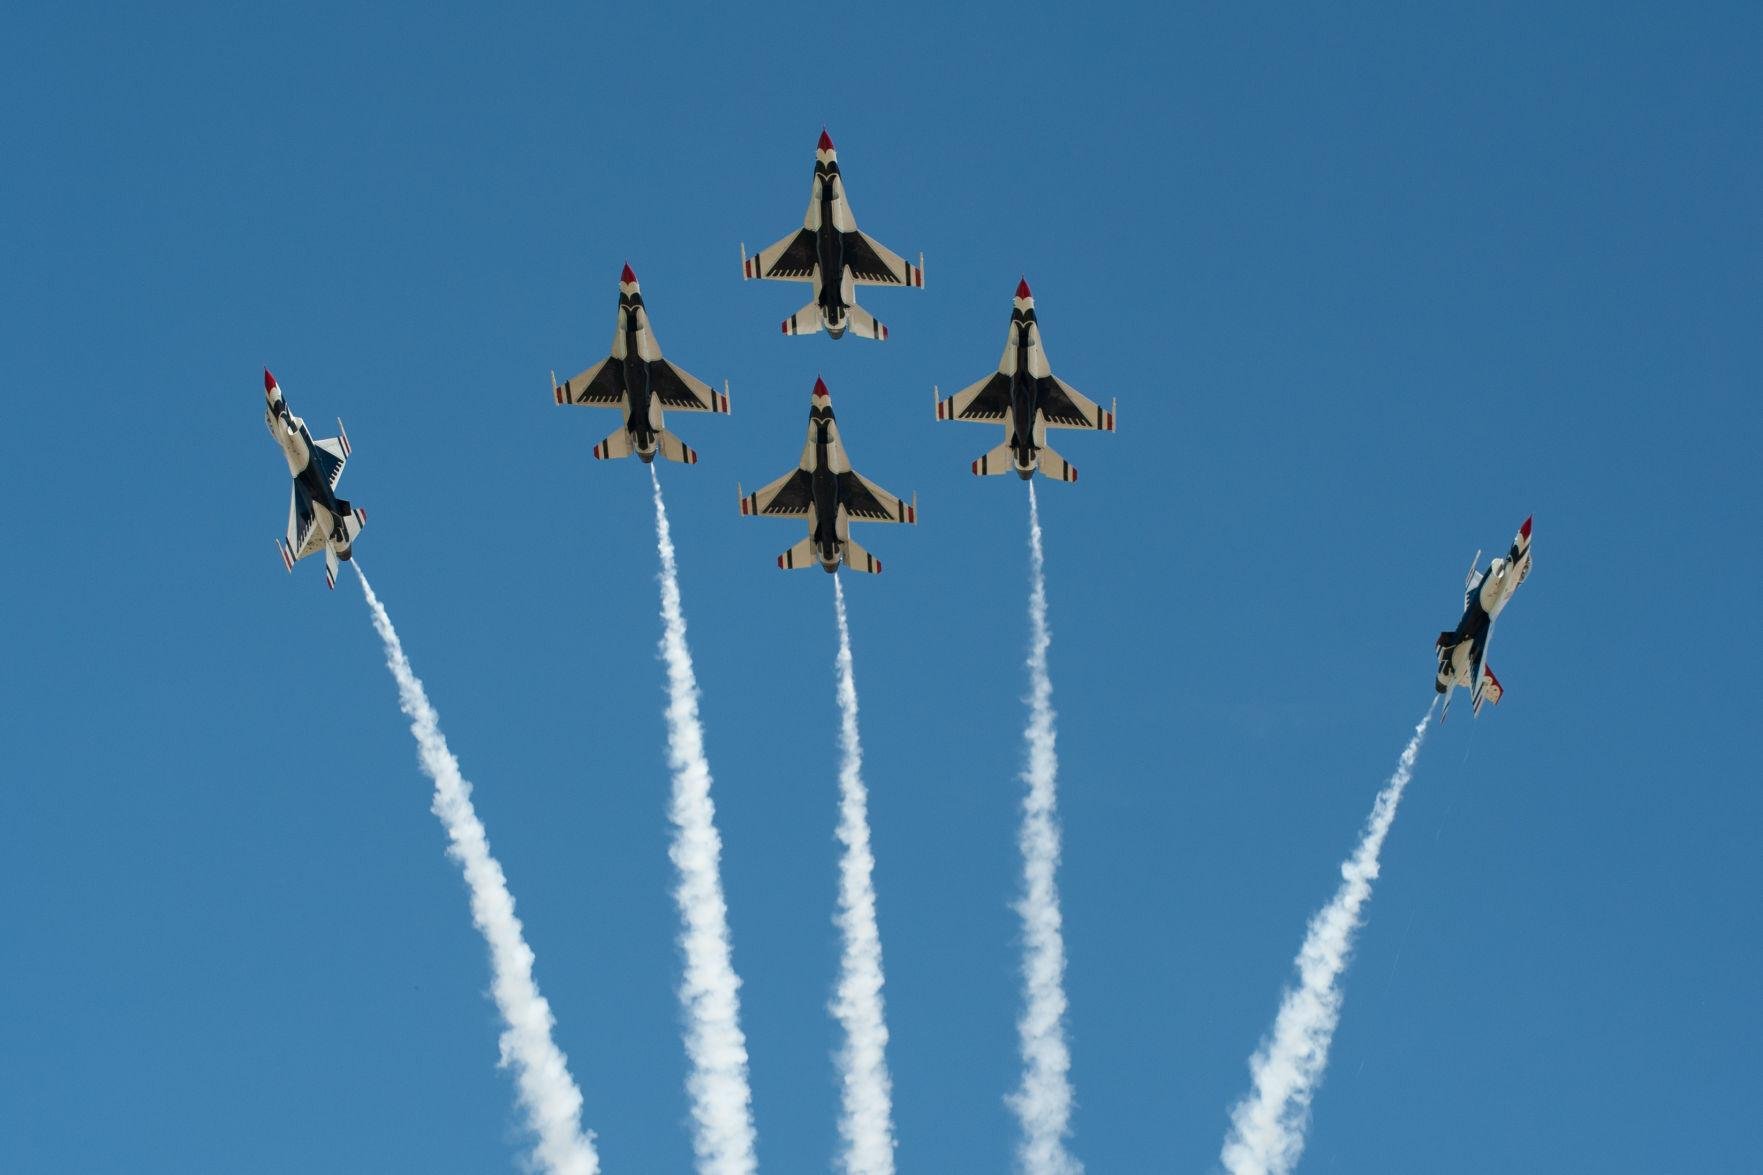 Wings Over Warren Air Show begins at 9 a.m. Wednesday, base access